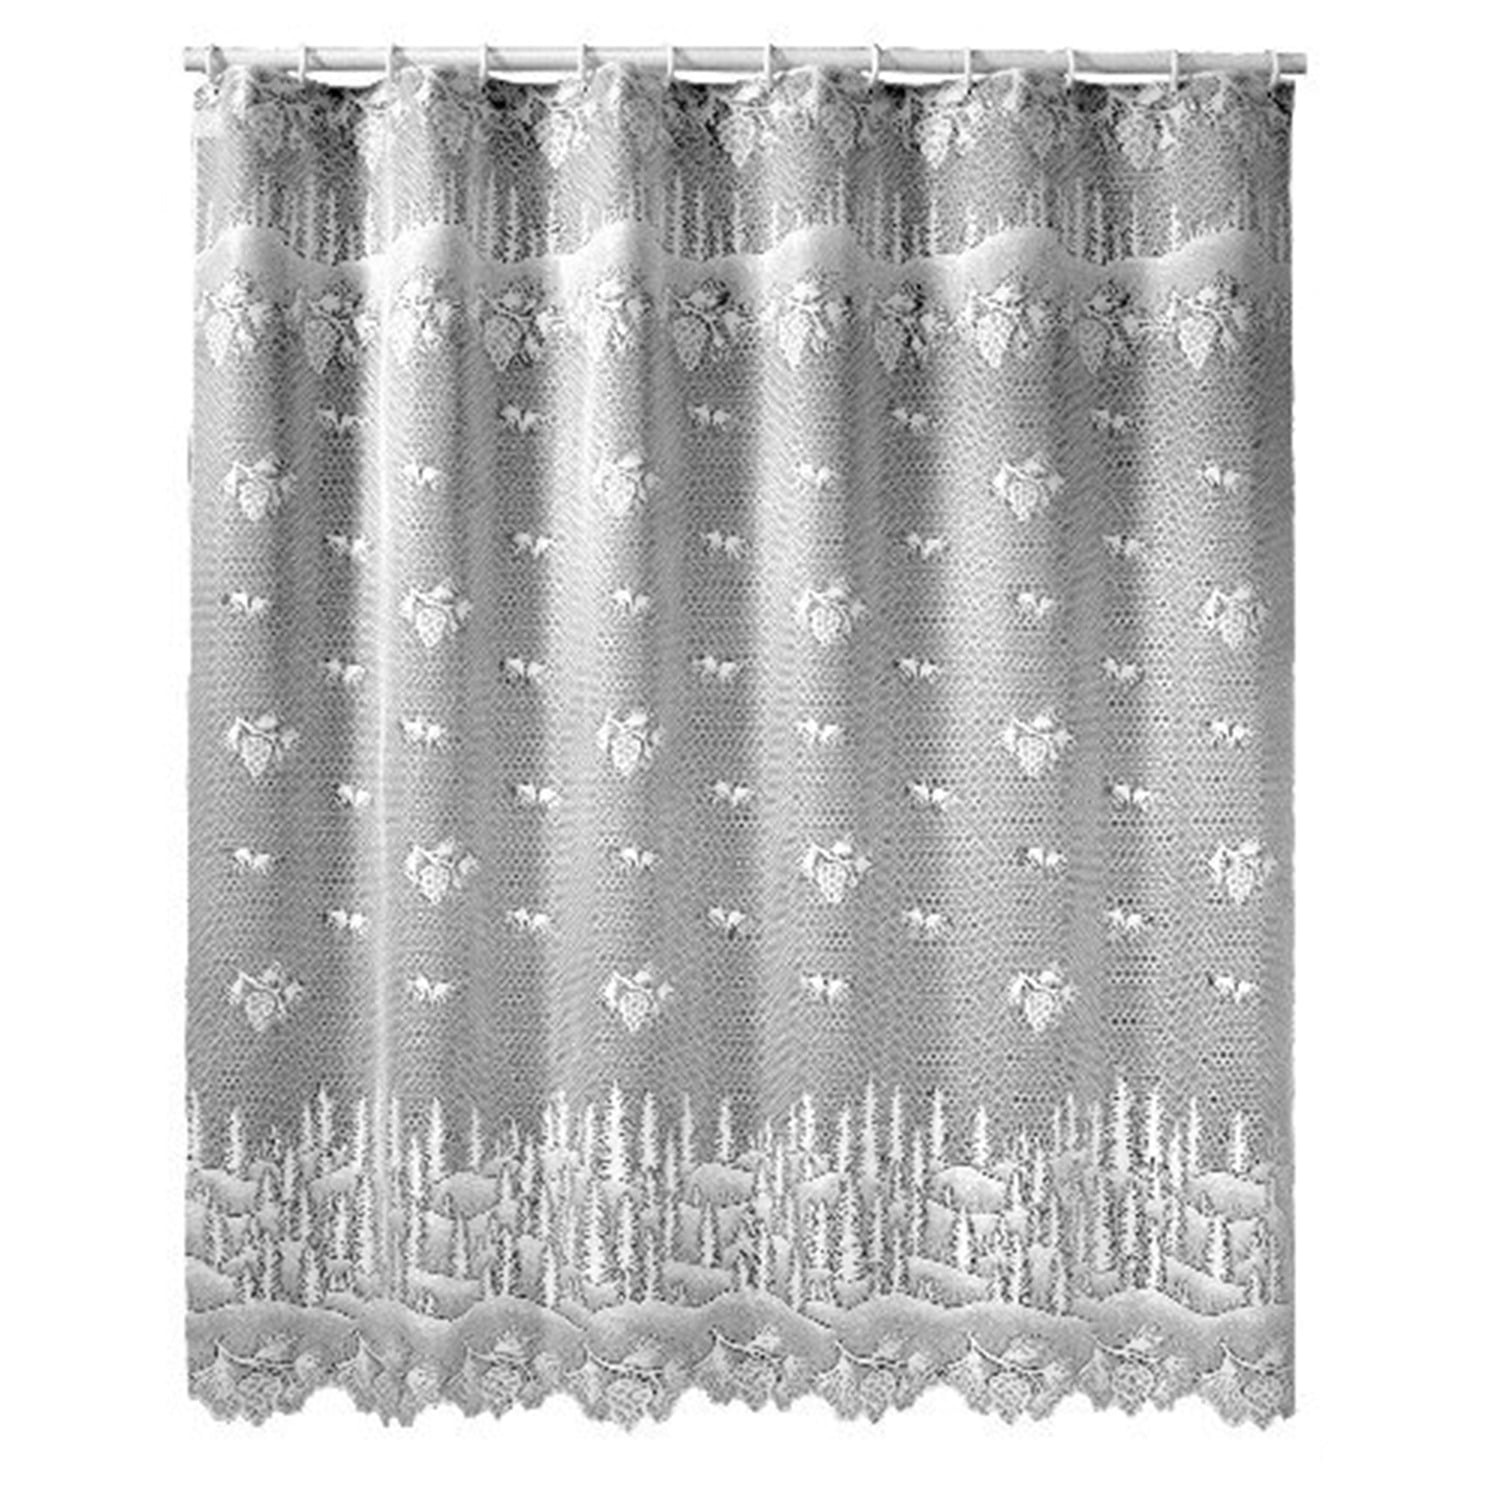  YISURE Clawfoot Tub Shower Curtain Liner 180x60 Inch, 360 Shower  Curtain Short Length PEVA Wrap Around Bath Tub Curtain with 6 Bottom  Magnets for Bathroom Freestanding Tub : Home & Kitchen